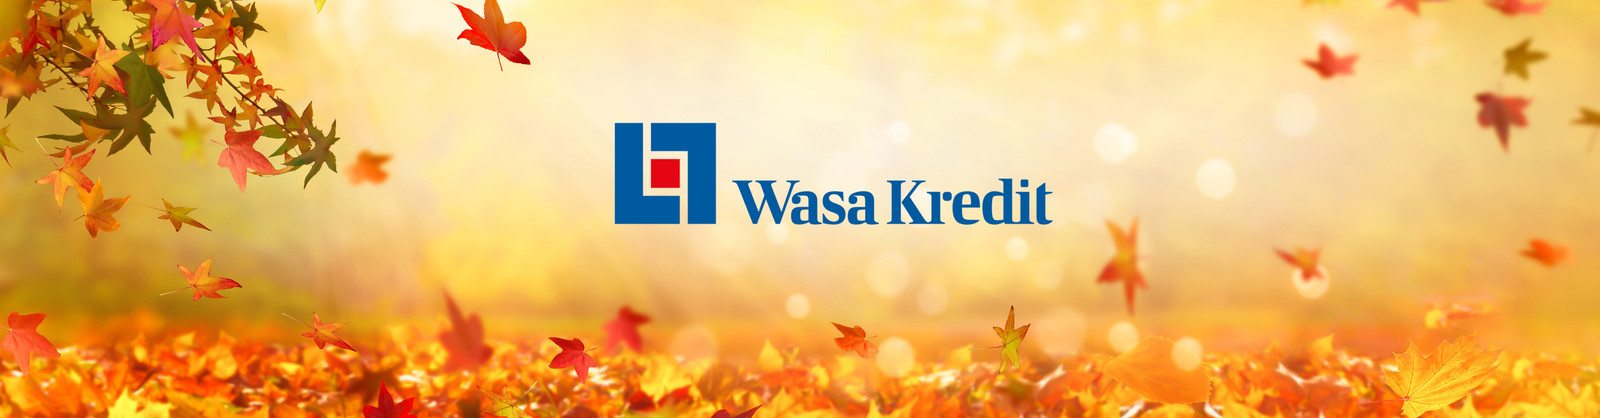 Wasa Kredit logo on a warm background with leaves